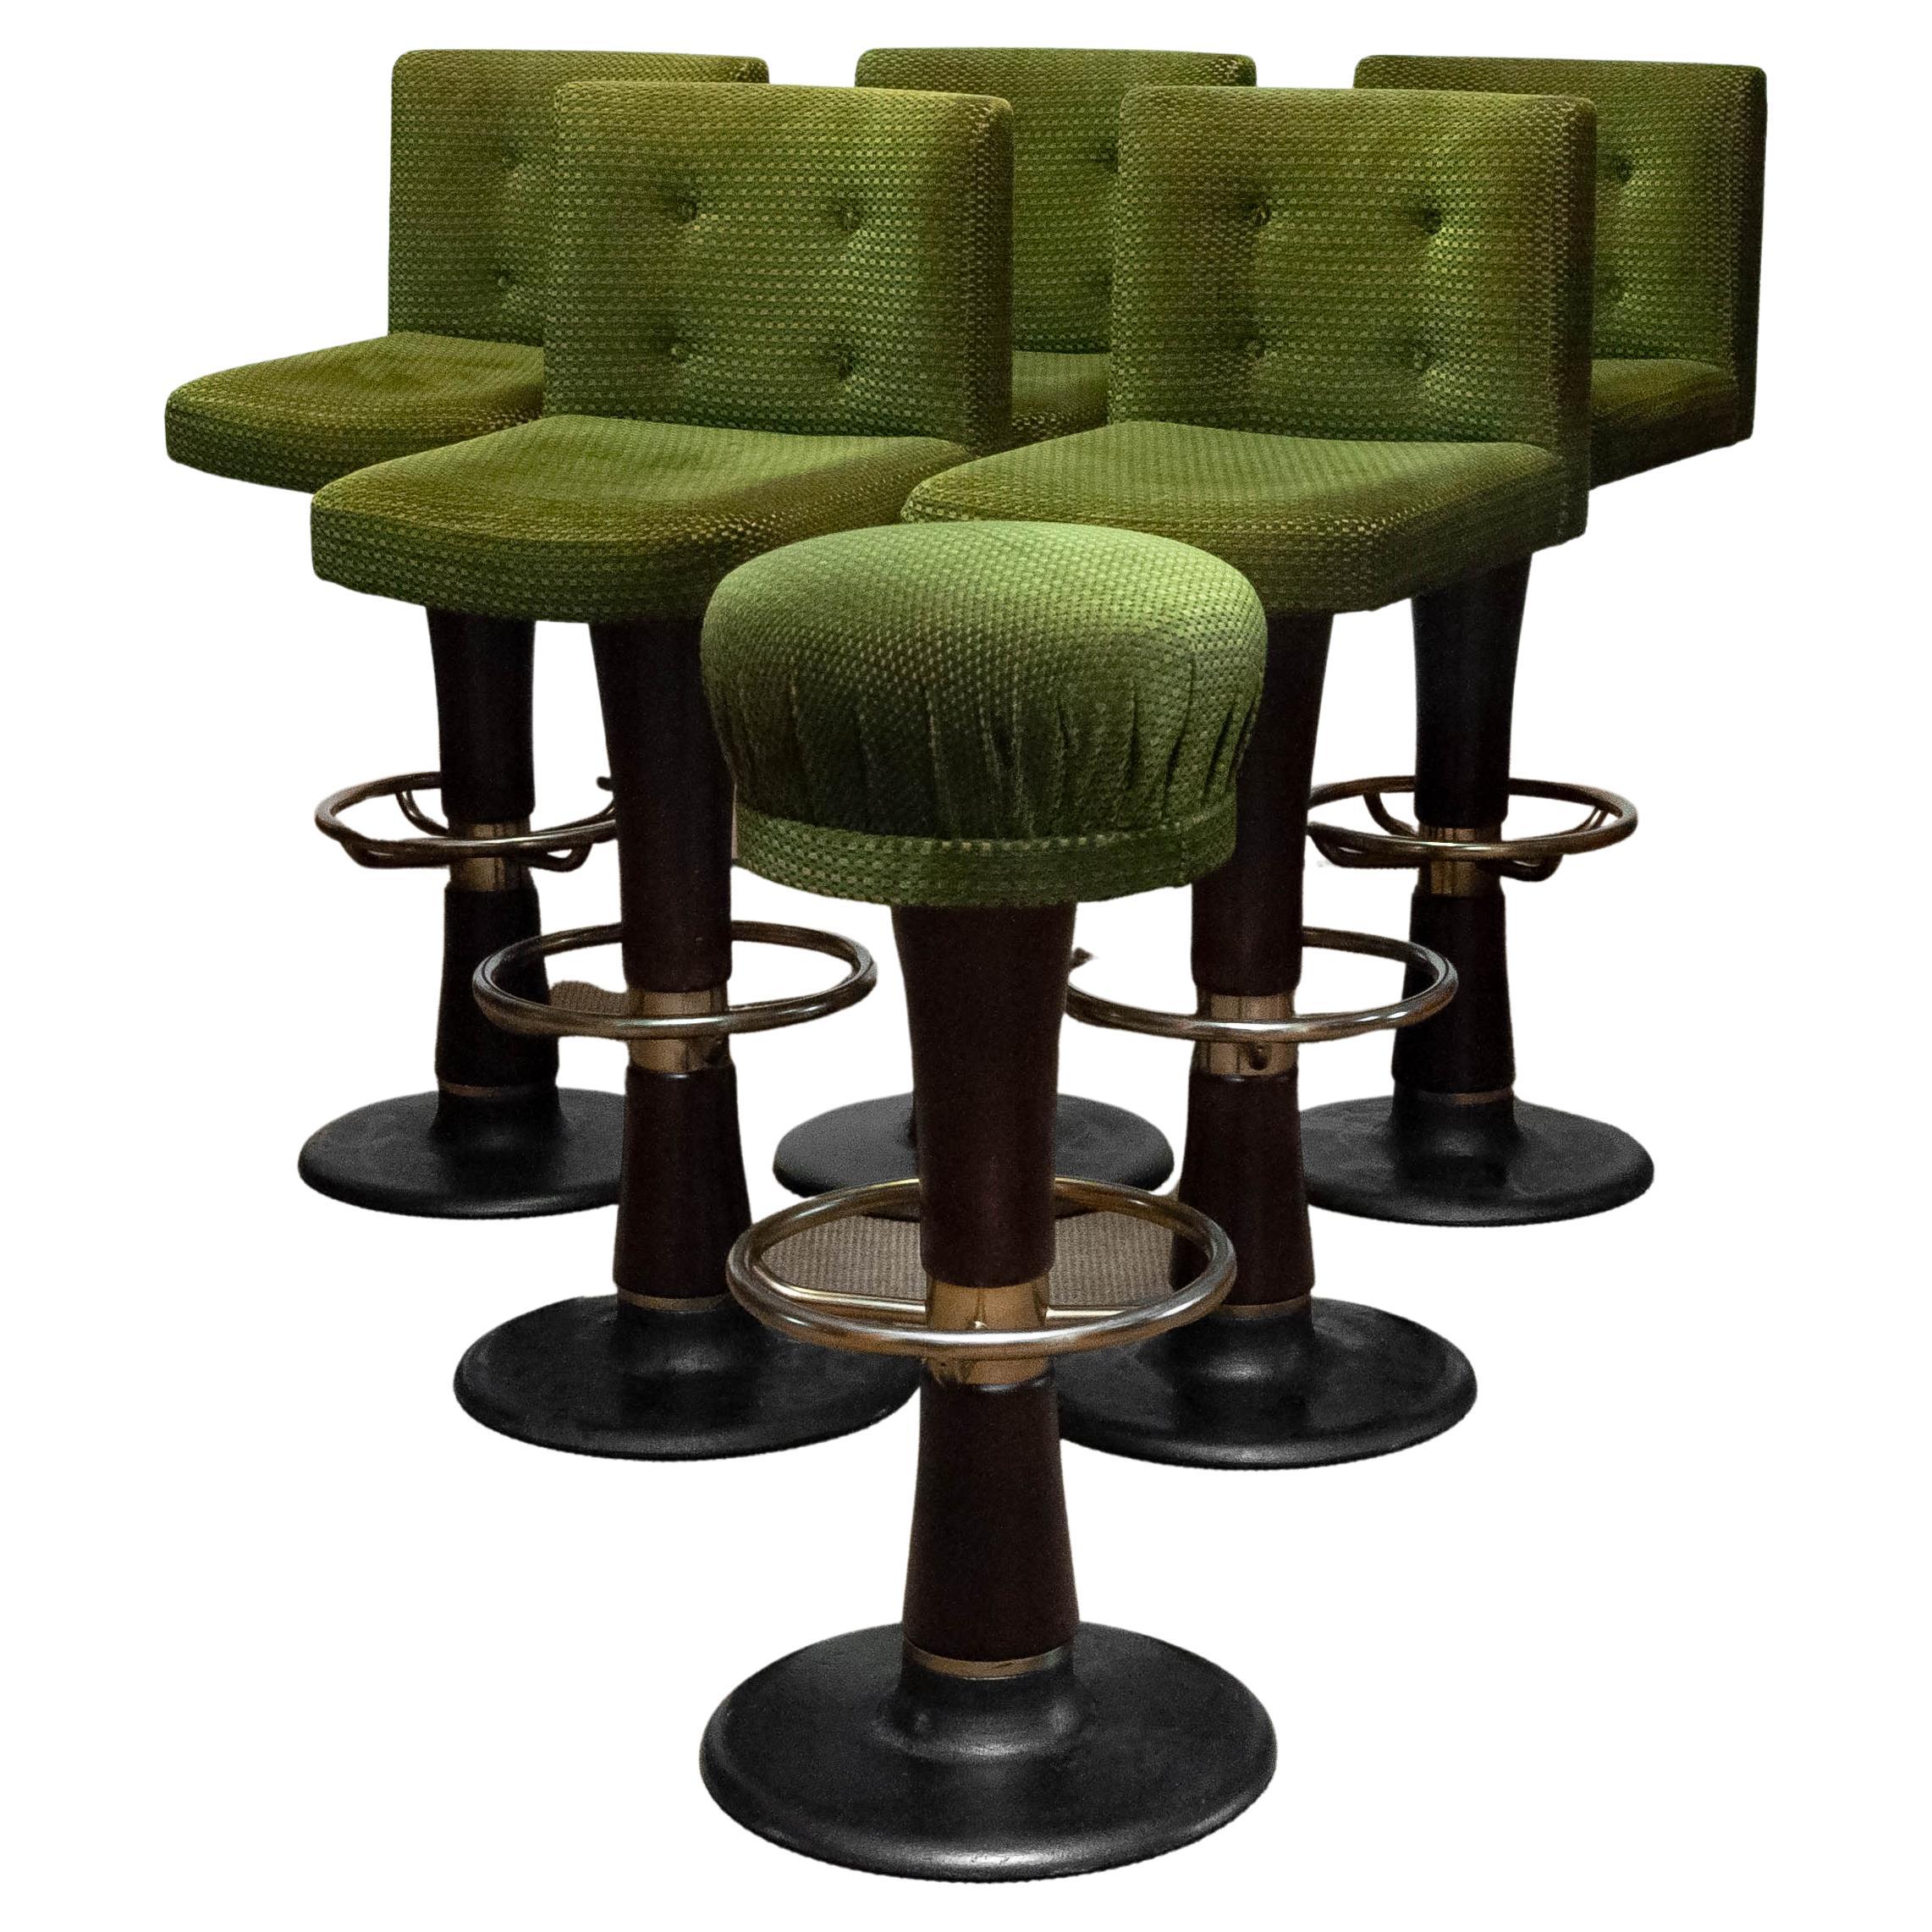 Absolutely stunning and beautiful set of six German ( high quality ) swivel bar / yacht stools consisting five stools with back-rests and one stool ( for the bar tender ) with-out back-rest.
The five swivel stools with back-rest have a spring system